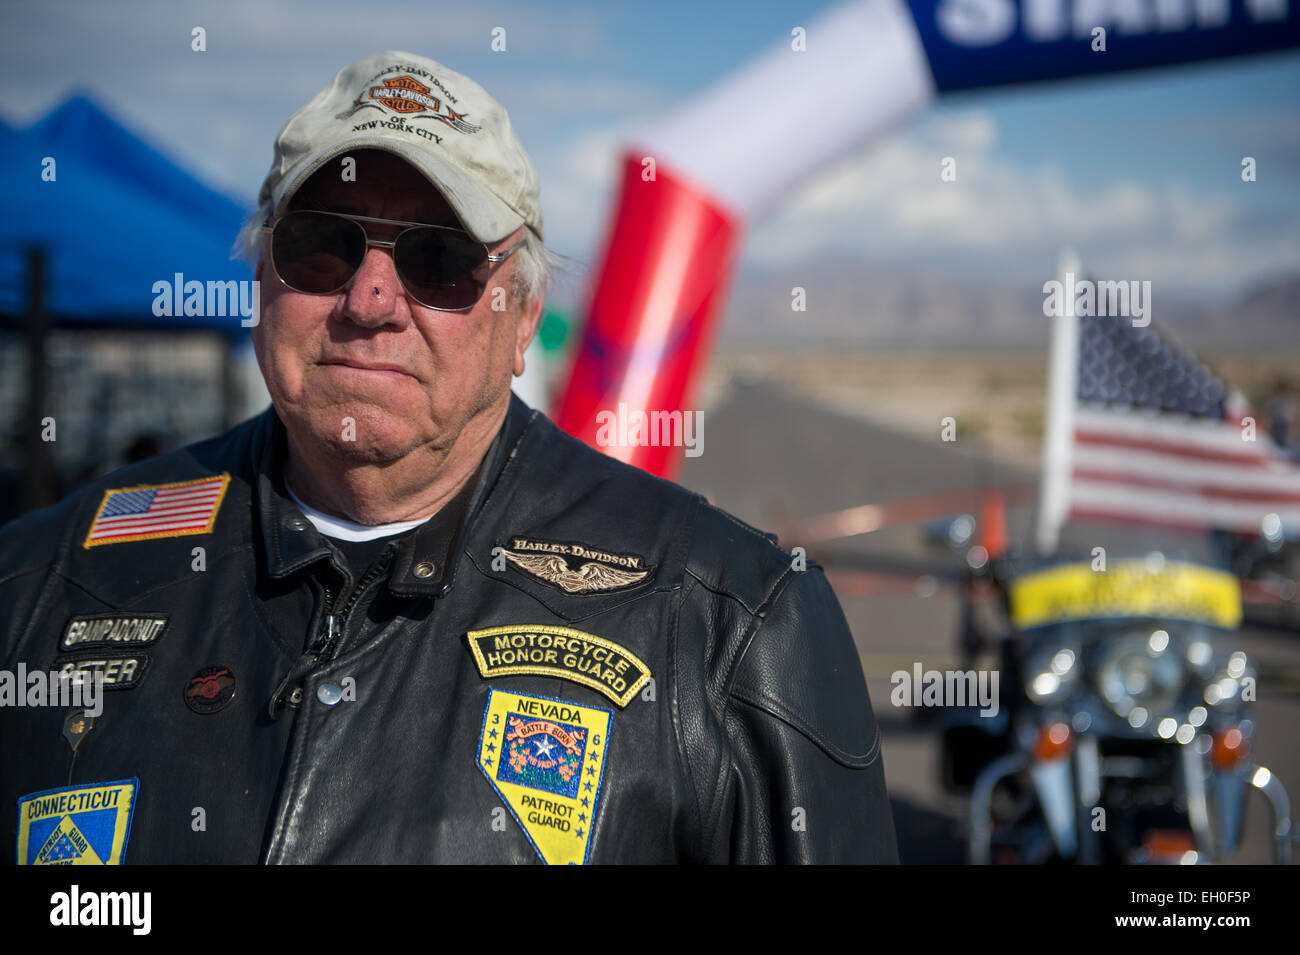 Peter Doyle, member of the Nevada Patriot Guard, awaits the start of the Air Force Wounded Warrior Trials cycling competition held at Nellis Air Force Base, Nev. Feb. 28, 2015. The Nevada Patriot Guard escorted the participants of the cycling competition around the track. The Air Force Trials are an adaptive sports event designed to promote the mental and physical well-being of seriously ill and injured military members and veterans. More than 105 wounded, ill or injured service men and women from around the country will compete for a spot on the 2015 U.S. Air Force Wounded Warrior Team which Stock Photo